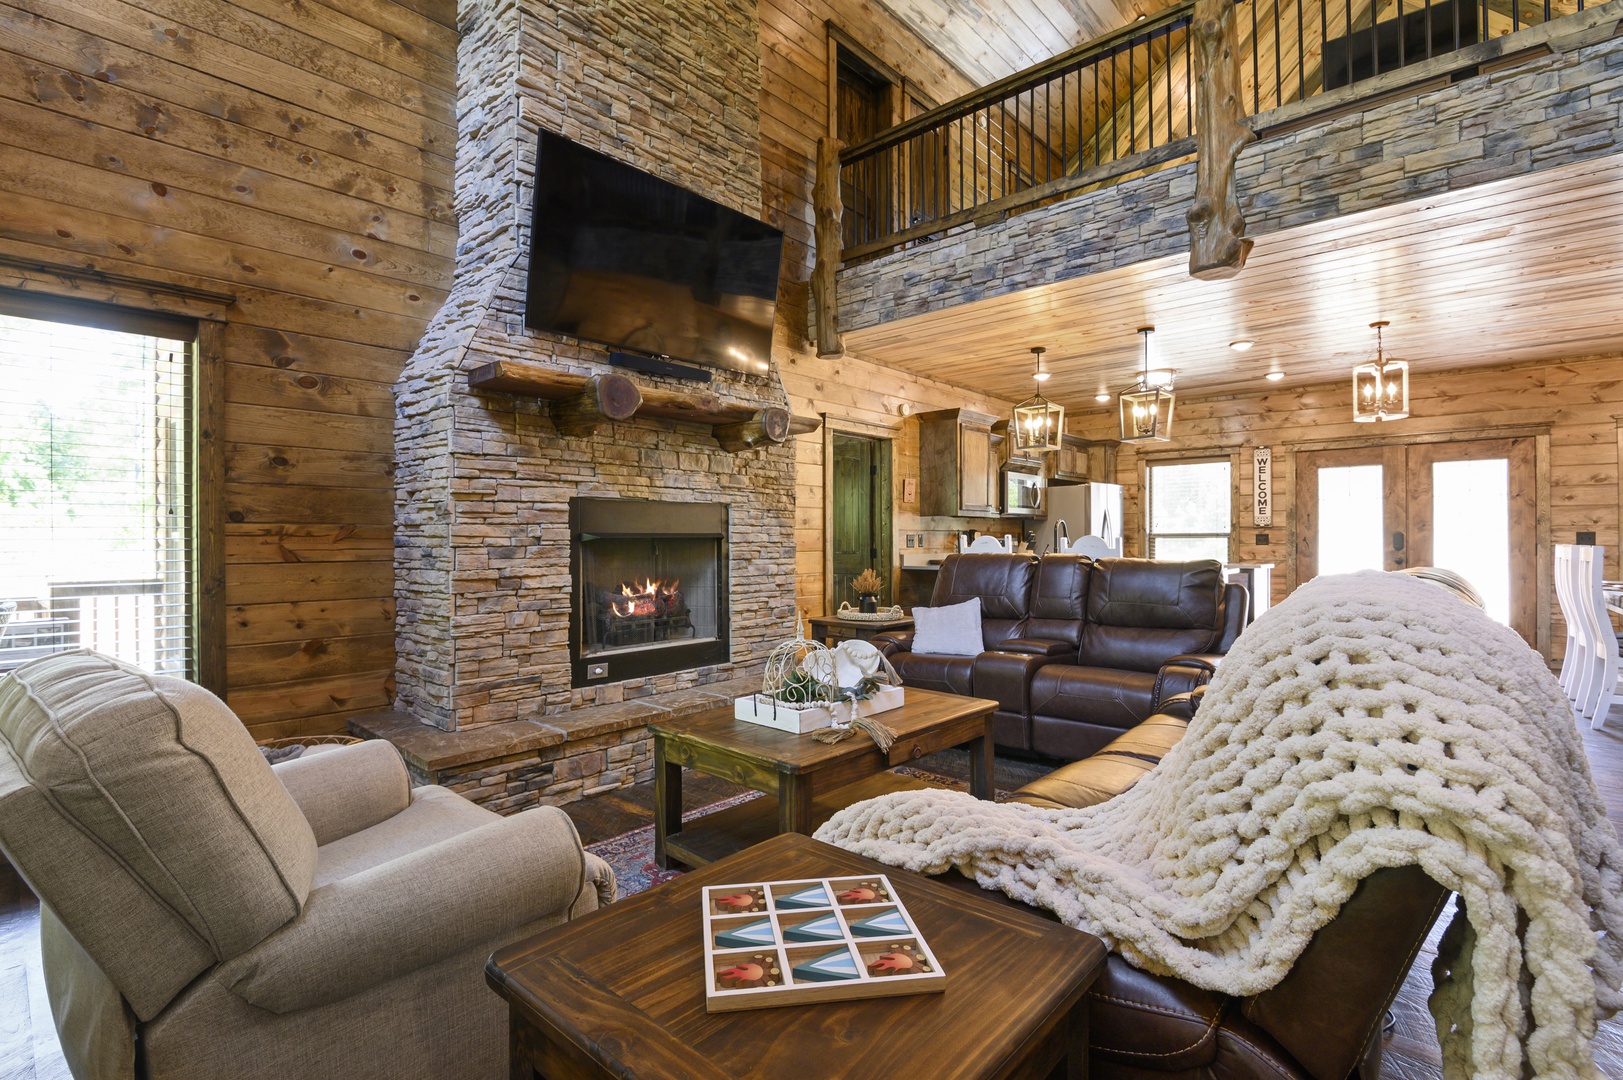 You will love this cabin's traditional rustic charm